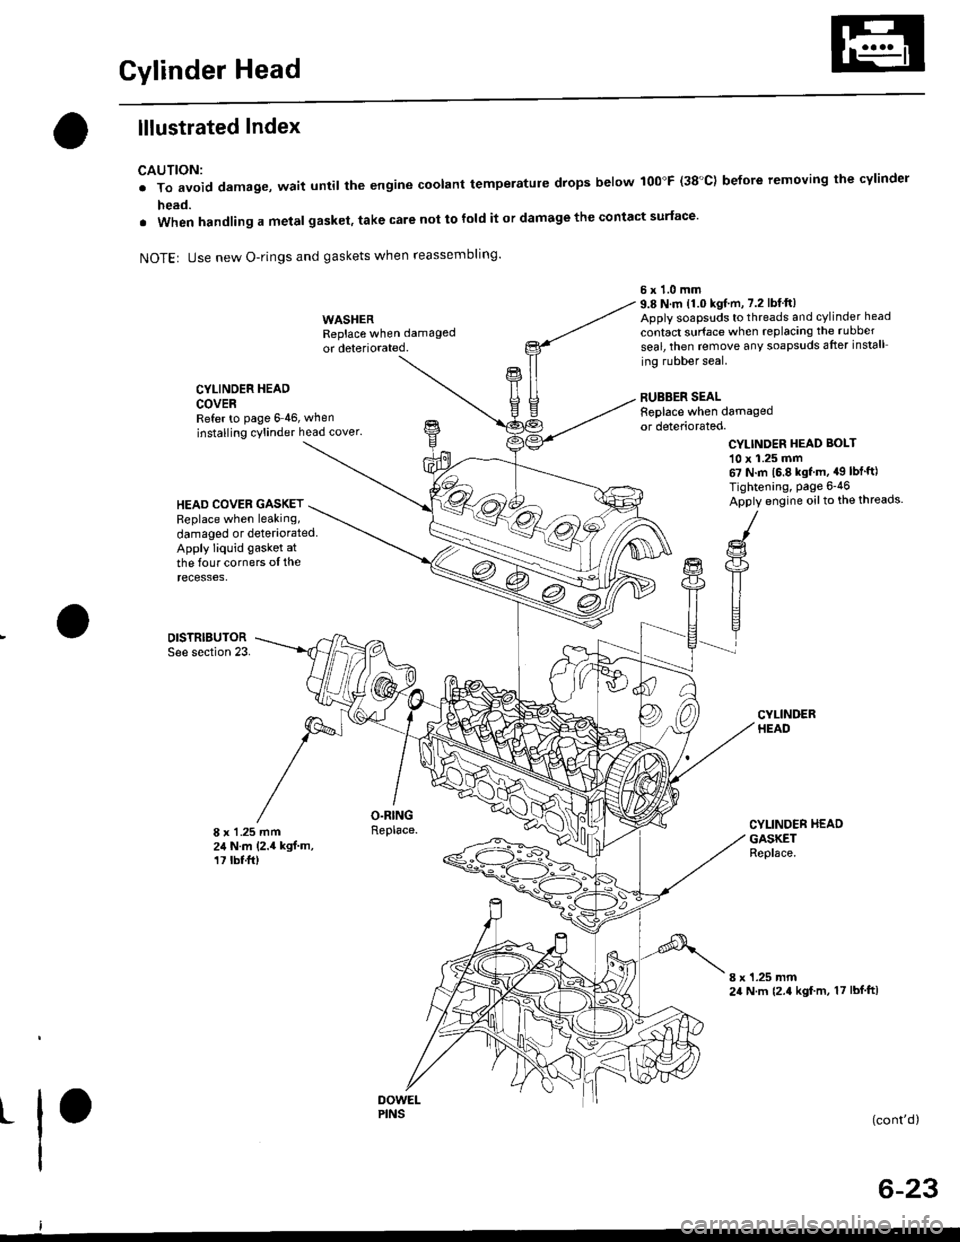 HONDA CIVIC 1997 6.G Owners Manual Gylinder Head
lllustrated Index
CAUTION:
. To avoid damage, wait until the engine coolant temperatule drops below 100"F (38C) before removing the cylinder
head.
. When handling a metal gasket, take c